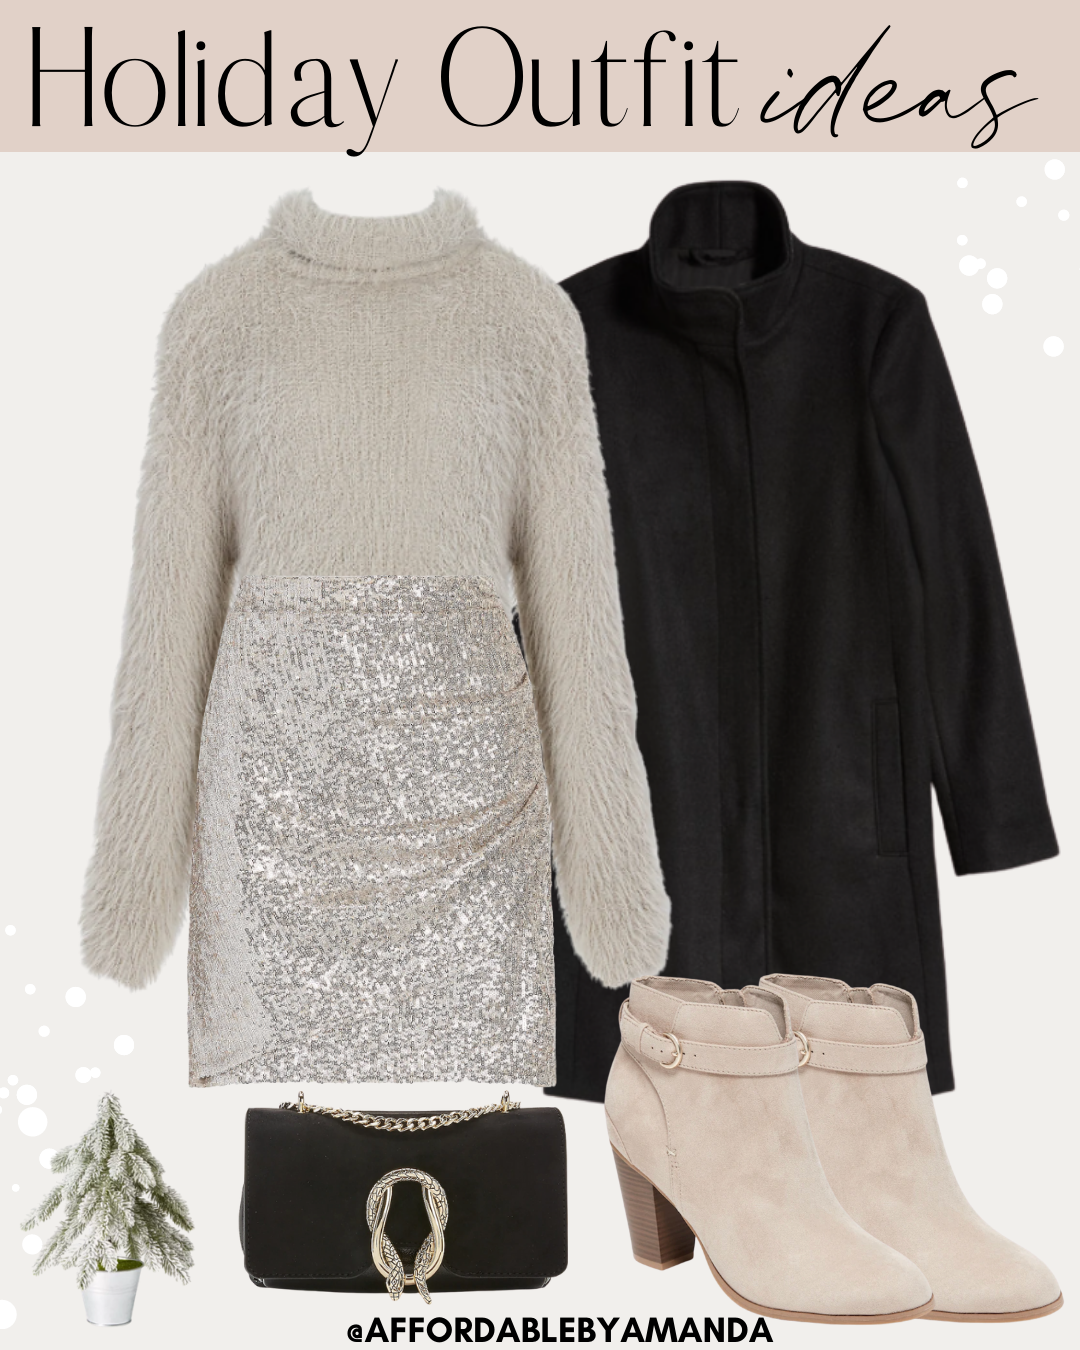 Fuzzy Faux Fur Cowl Neck Sweater | Sequin Skirt | Black Funnel Neck Coat - Affordable Holiday Outfit Ideas